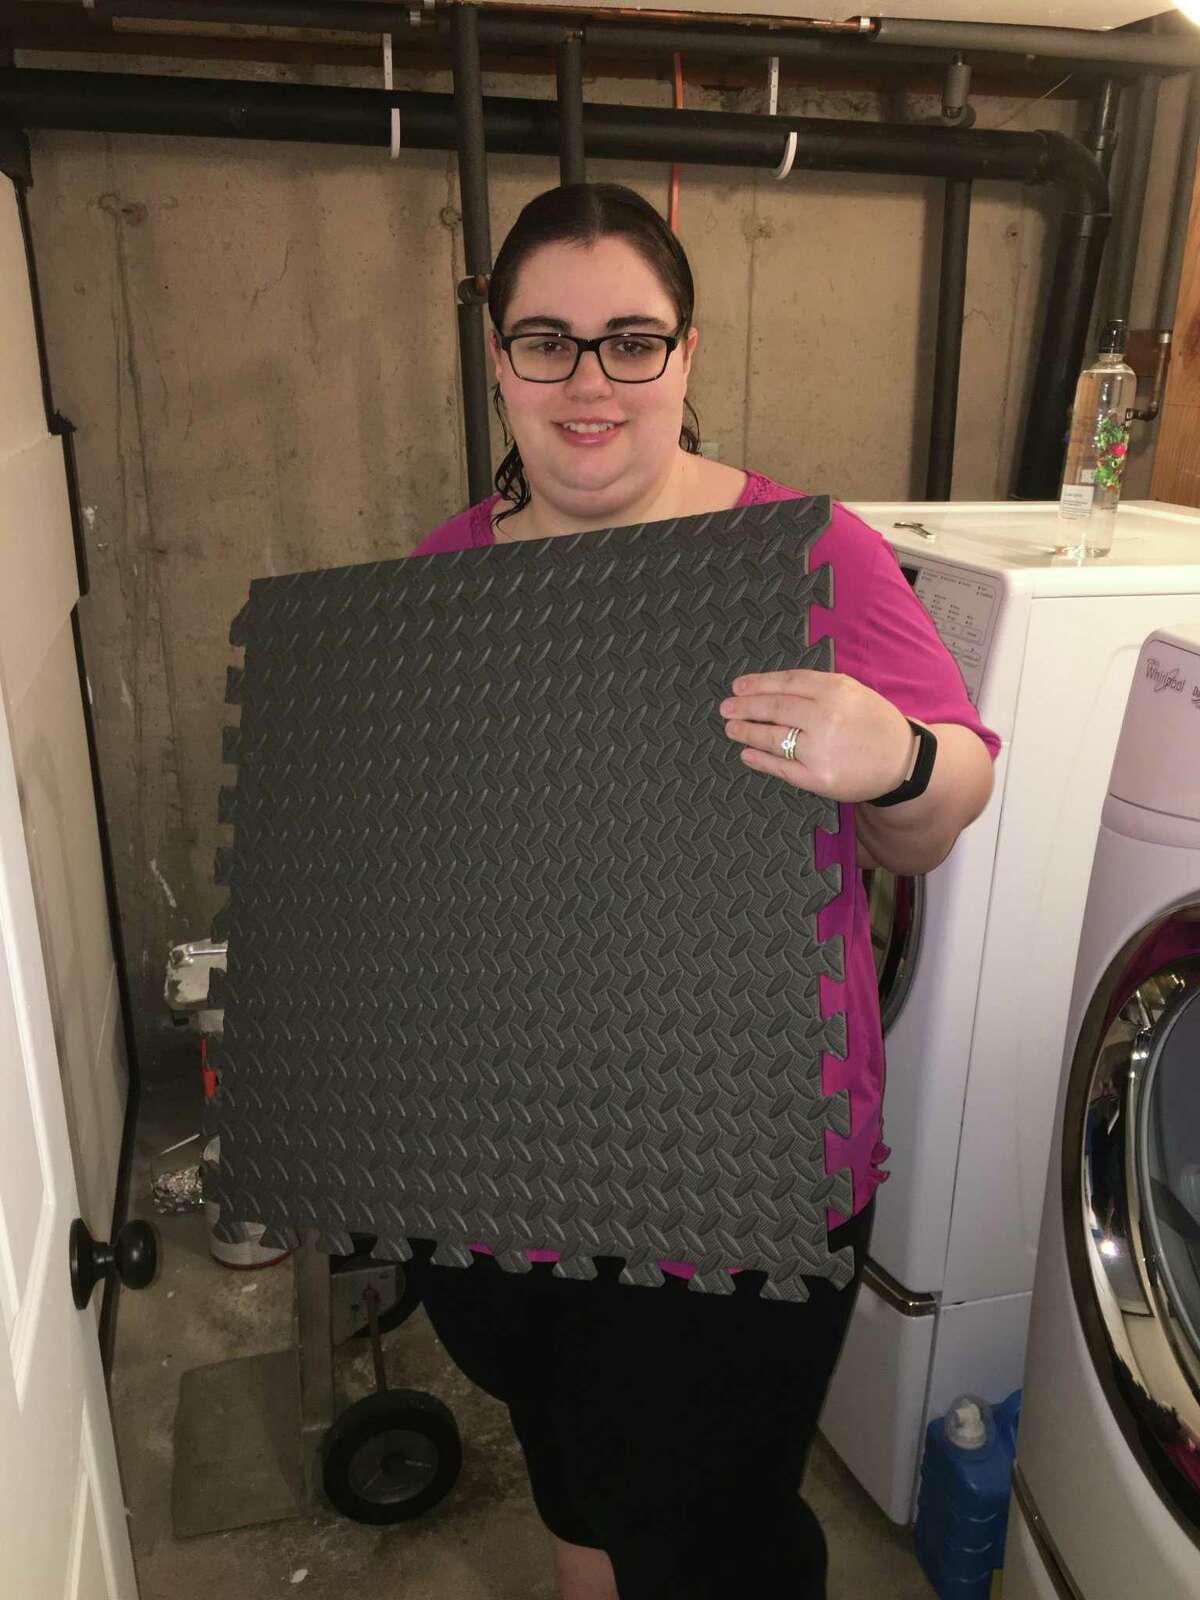 Nicole Zappone, writer, prepares to install a floor panel in her basement washroom. She and her husband, Nick, have been gradually renovating their home since they moved in in 2015. This latest project occurred while they were quarantined during the coronavirus.